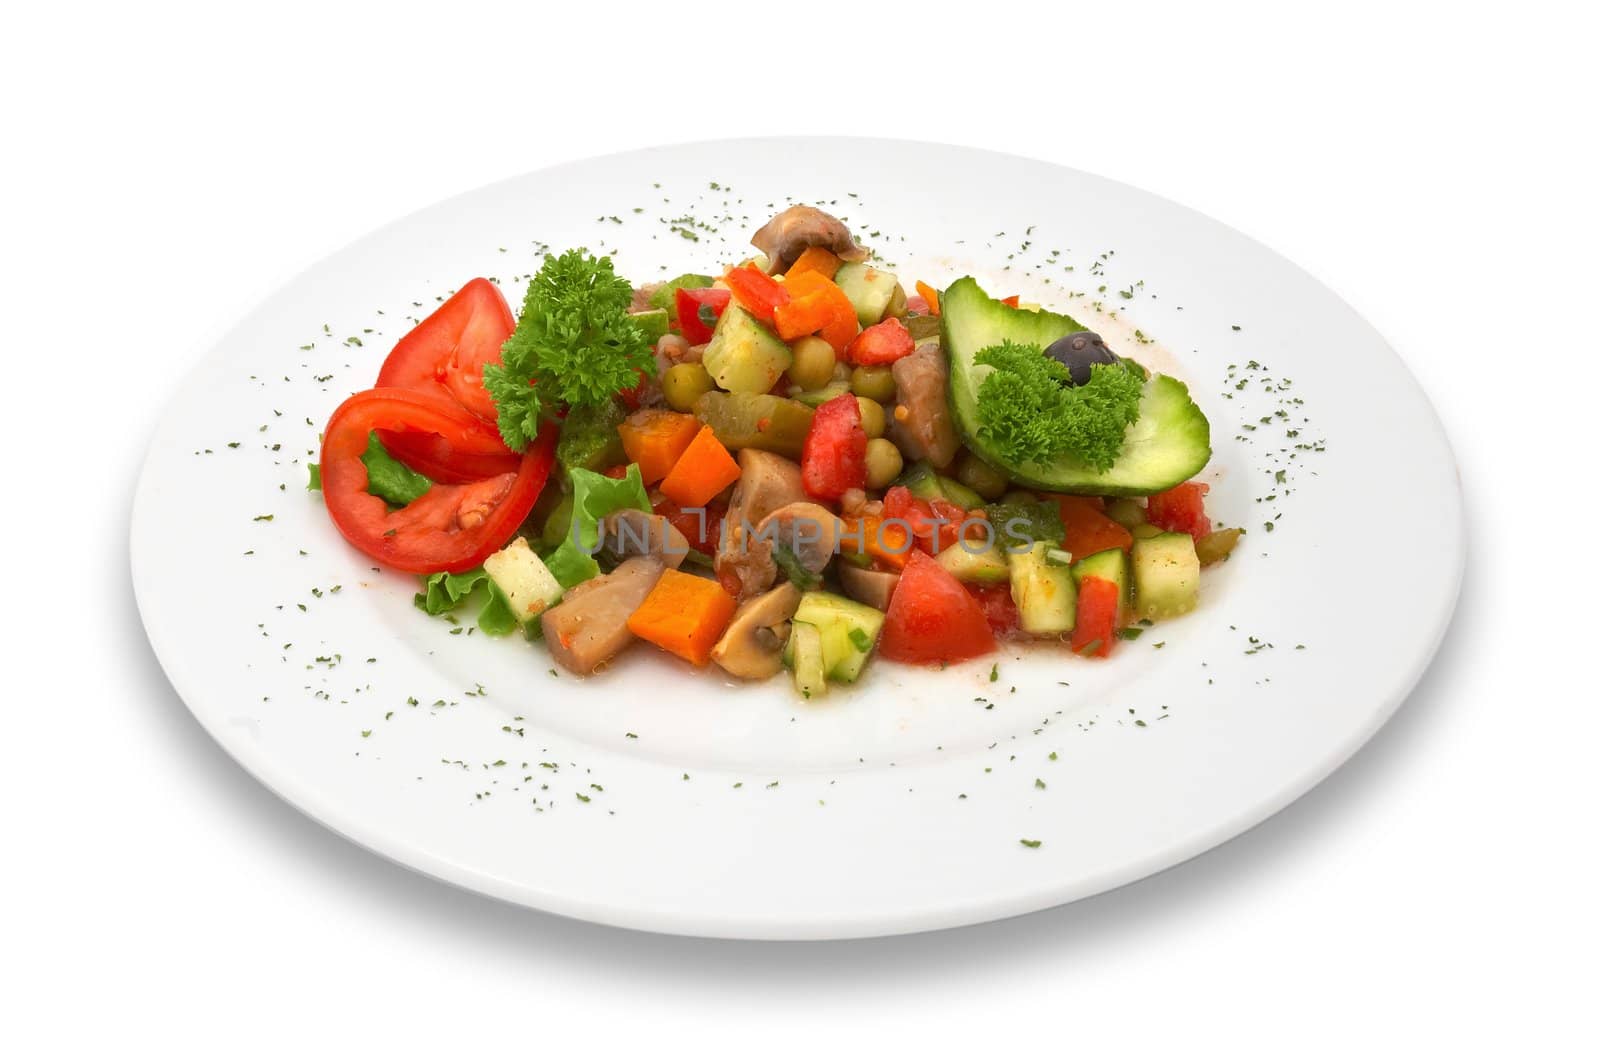 mixed mushroom and fresh vegetables salad served on plate. isolated.